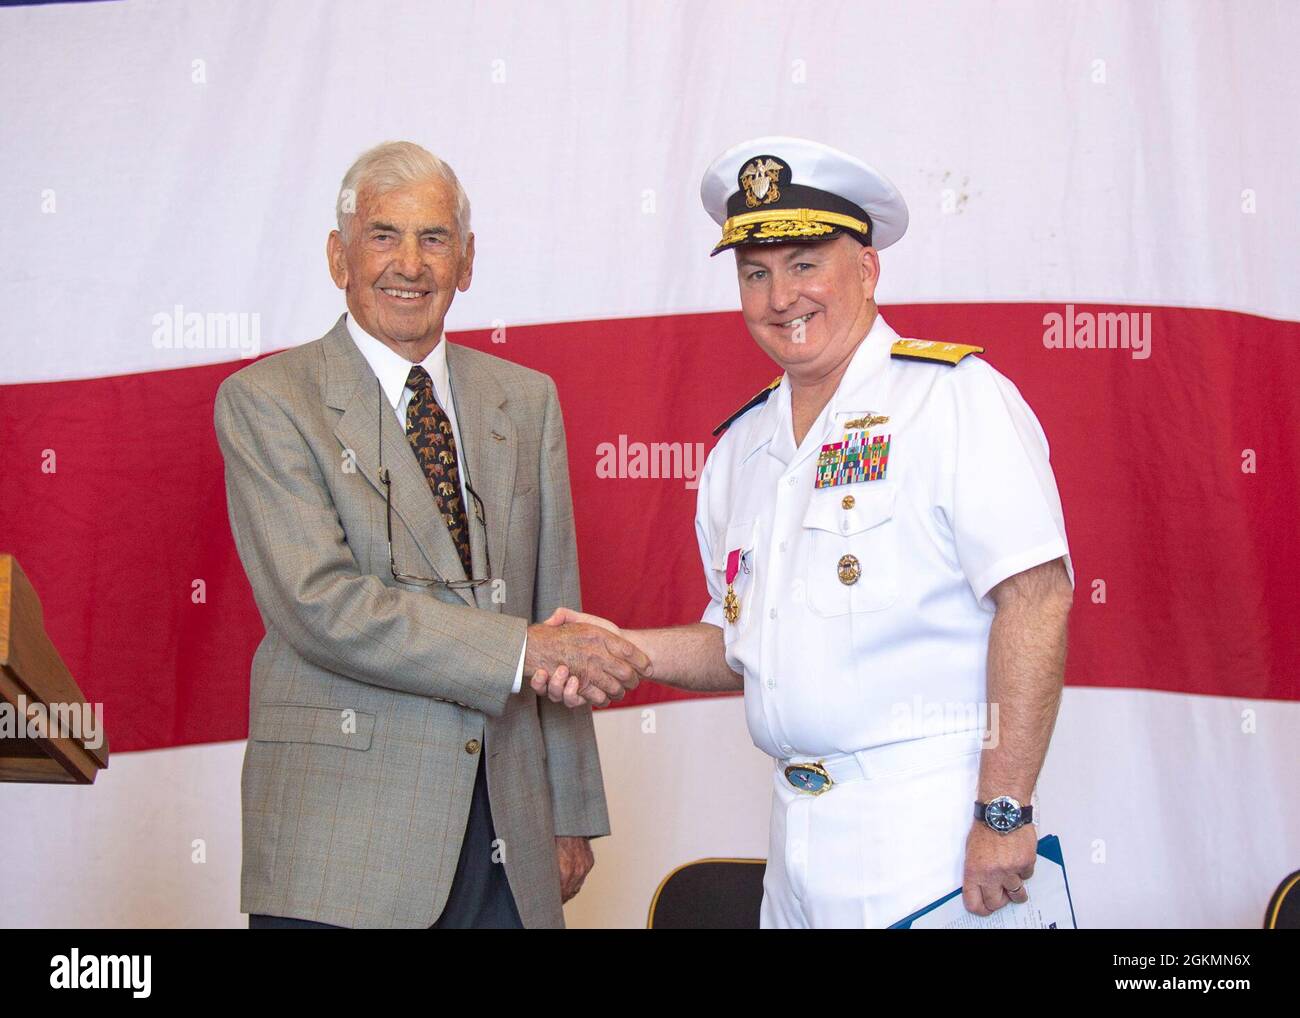 210528-N-TY704-1236 SAN DIEGO (May 28, 2021) Capt. (Ret.) Paul D. Stephenson awards Rear Adm. Timothy Kott, Commander, Carrier Strike Group (CSG) ONE, the Legion of Merit Award during a change of command ceremony, May 28, 2021. Carrier Strike Group ONE leads the Carl Vinson Carrier Strike Group with a team of ships, aircraft, and more than 60,000 Sailors, capable of carrying out missions around the globe. Vinson is currently pier side in its homeport of San Diego. Stock Photo